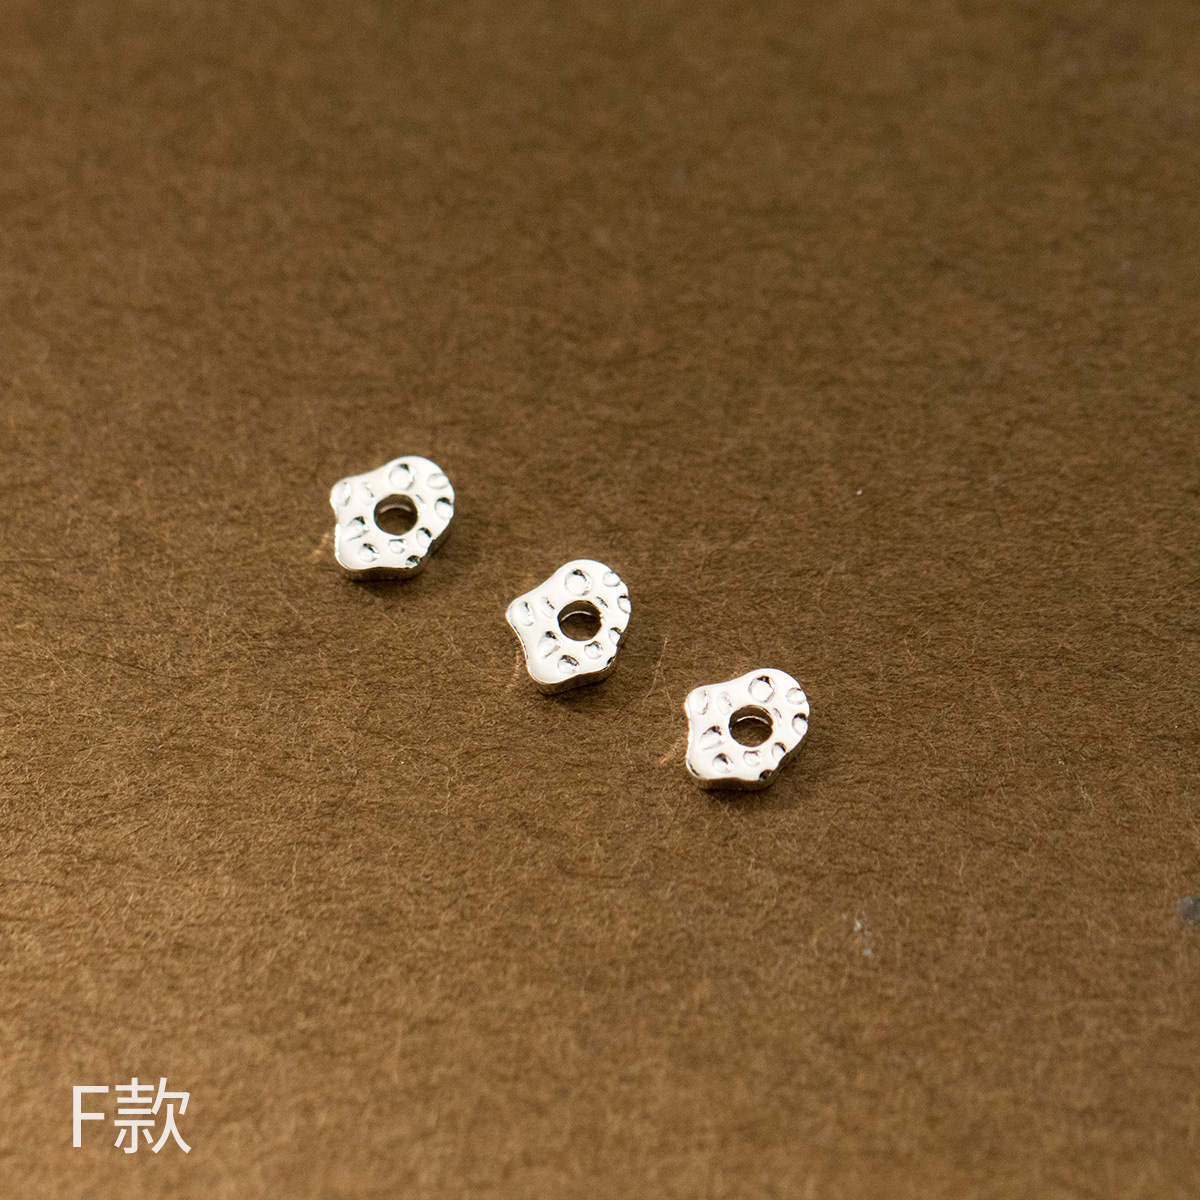 F (1g about 17 pieces)-4.0 * 0.8 mm thick hole 1.0